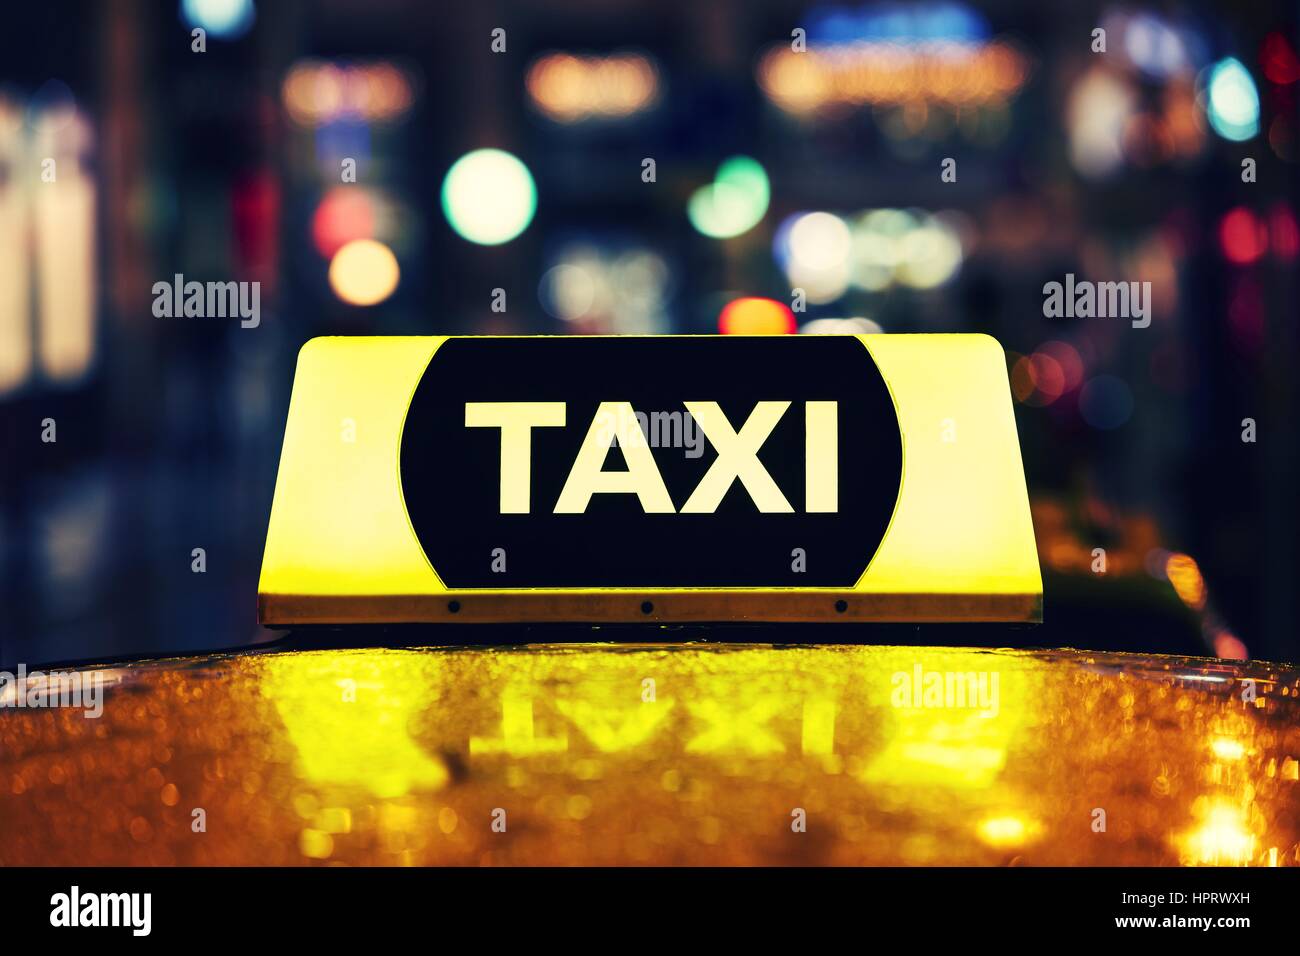 Taxi car on the street at night Stock Photo